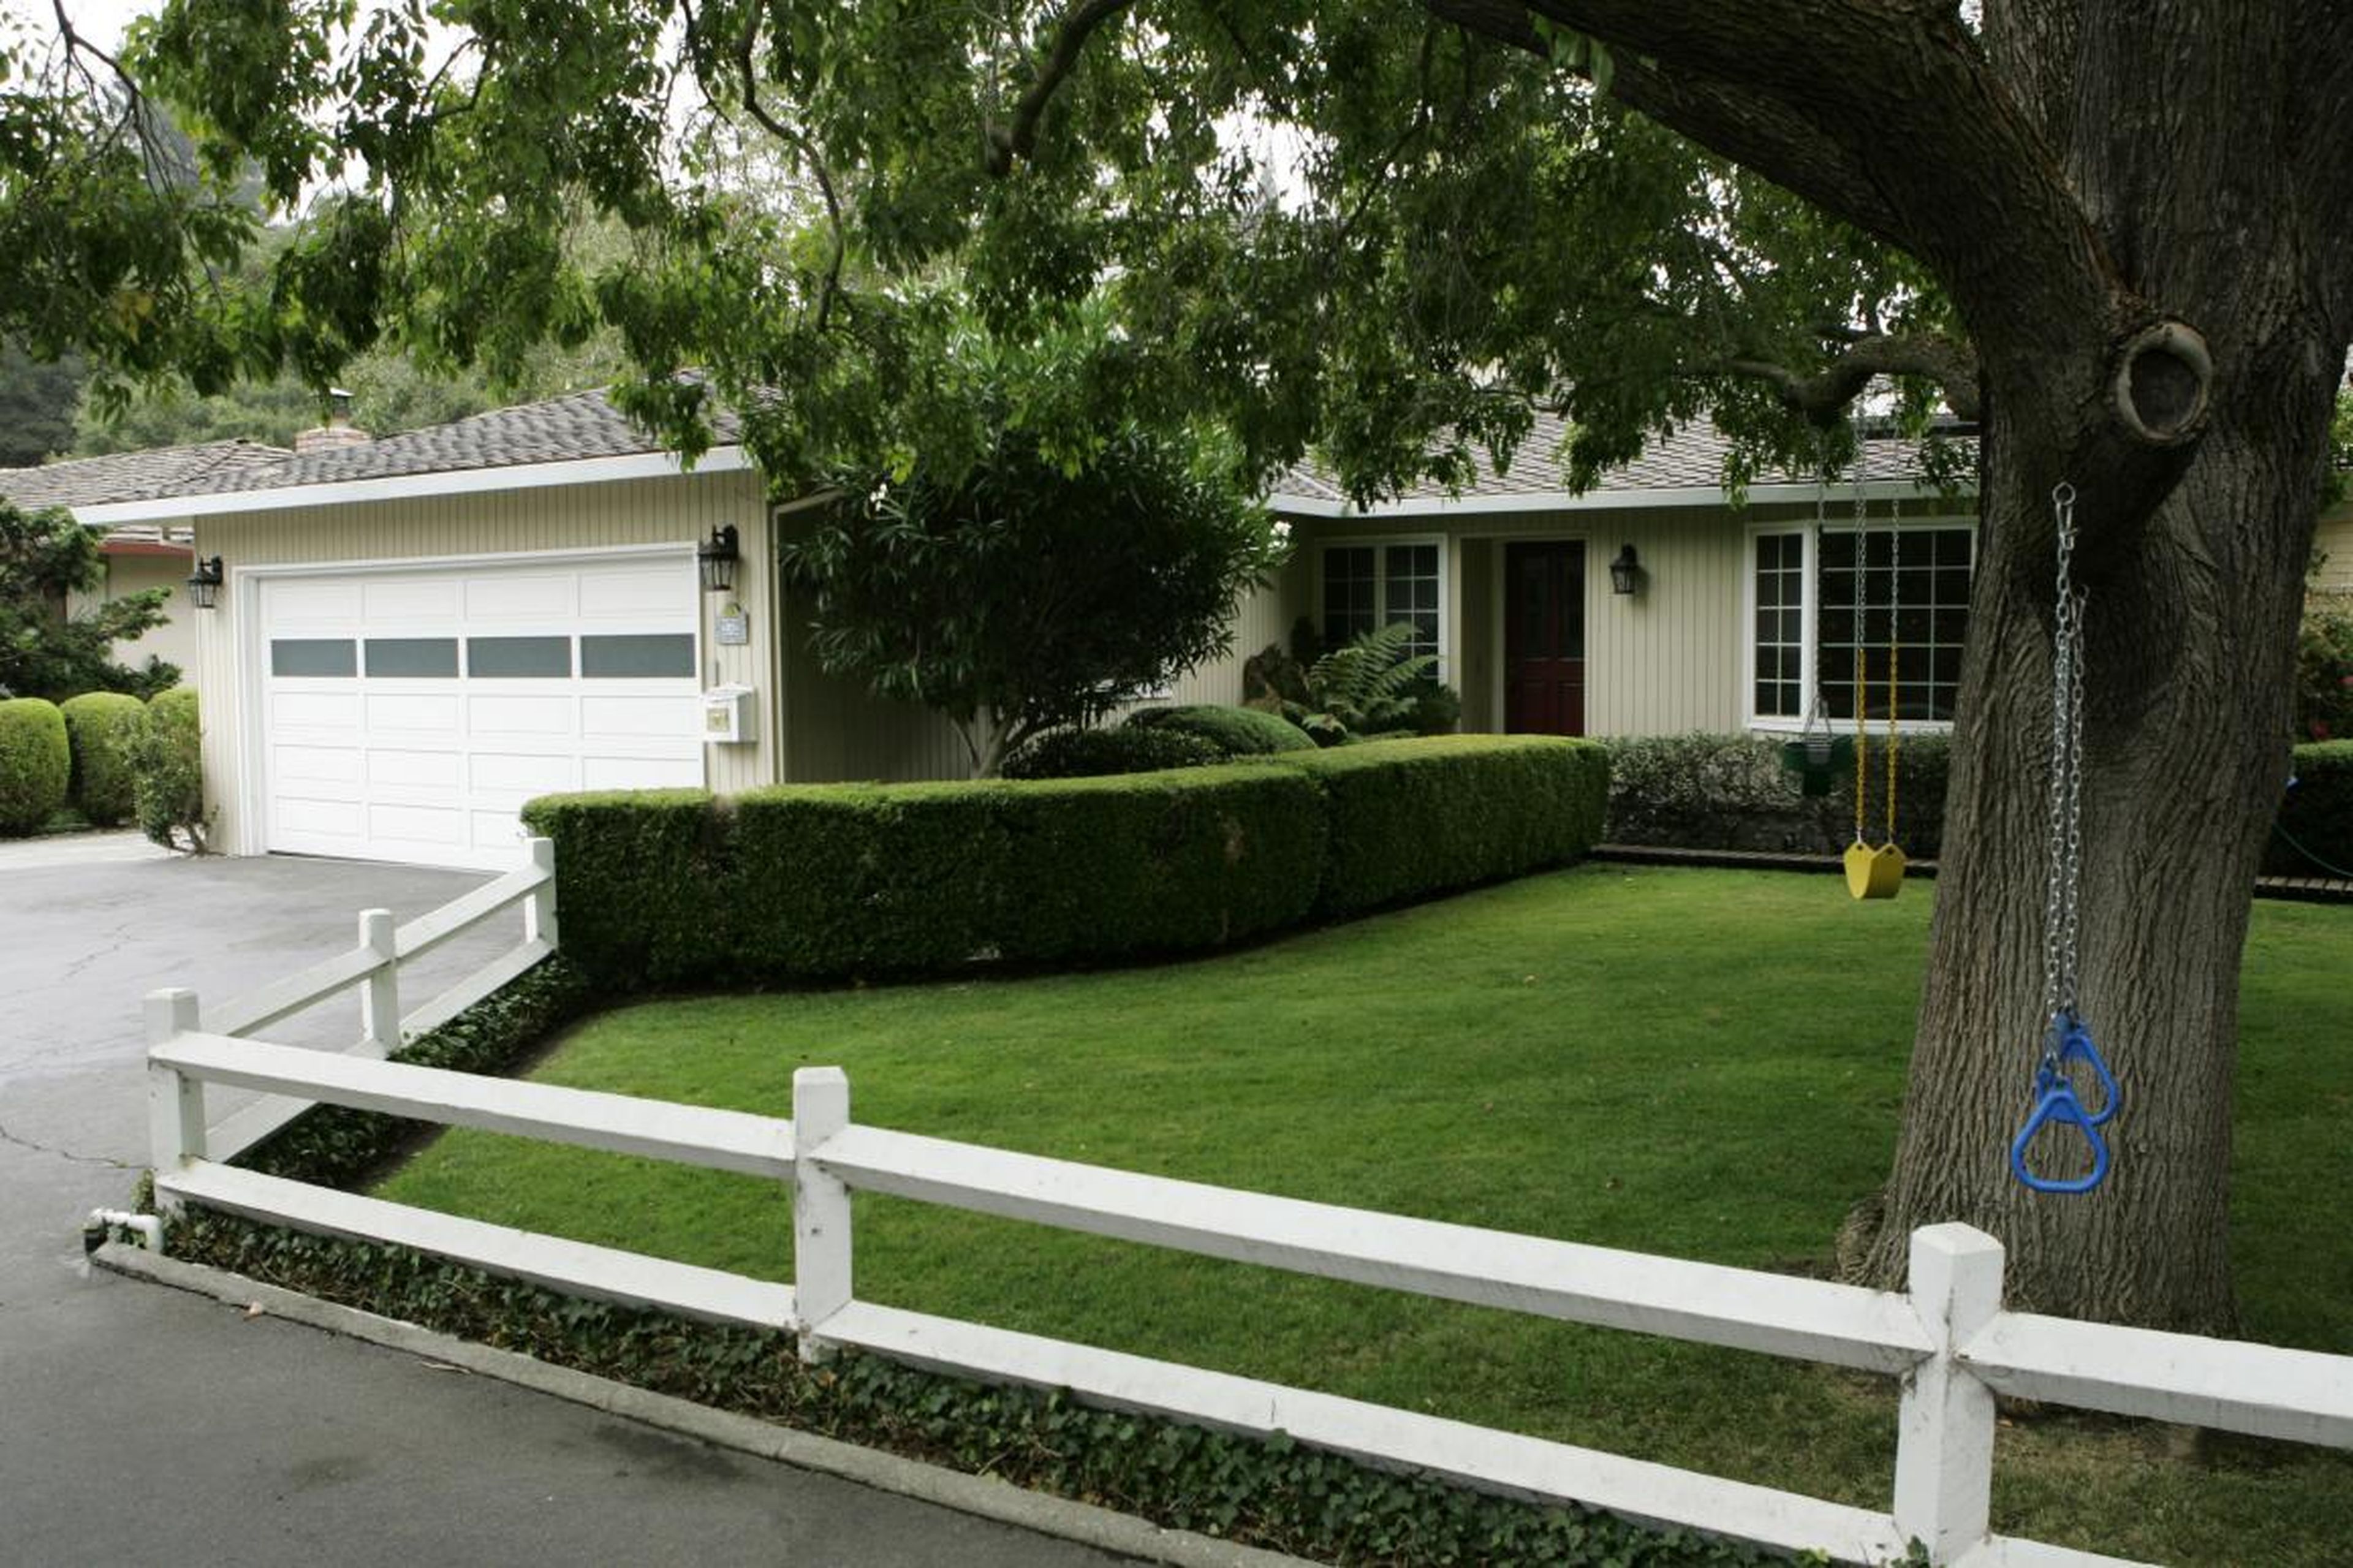 The garage was part of a house owned by Susan Wojcicki, now the head of YouTube. She charged the two future billionaires $1,700 per month to rent the garage.